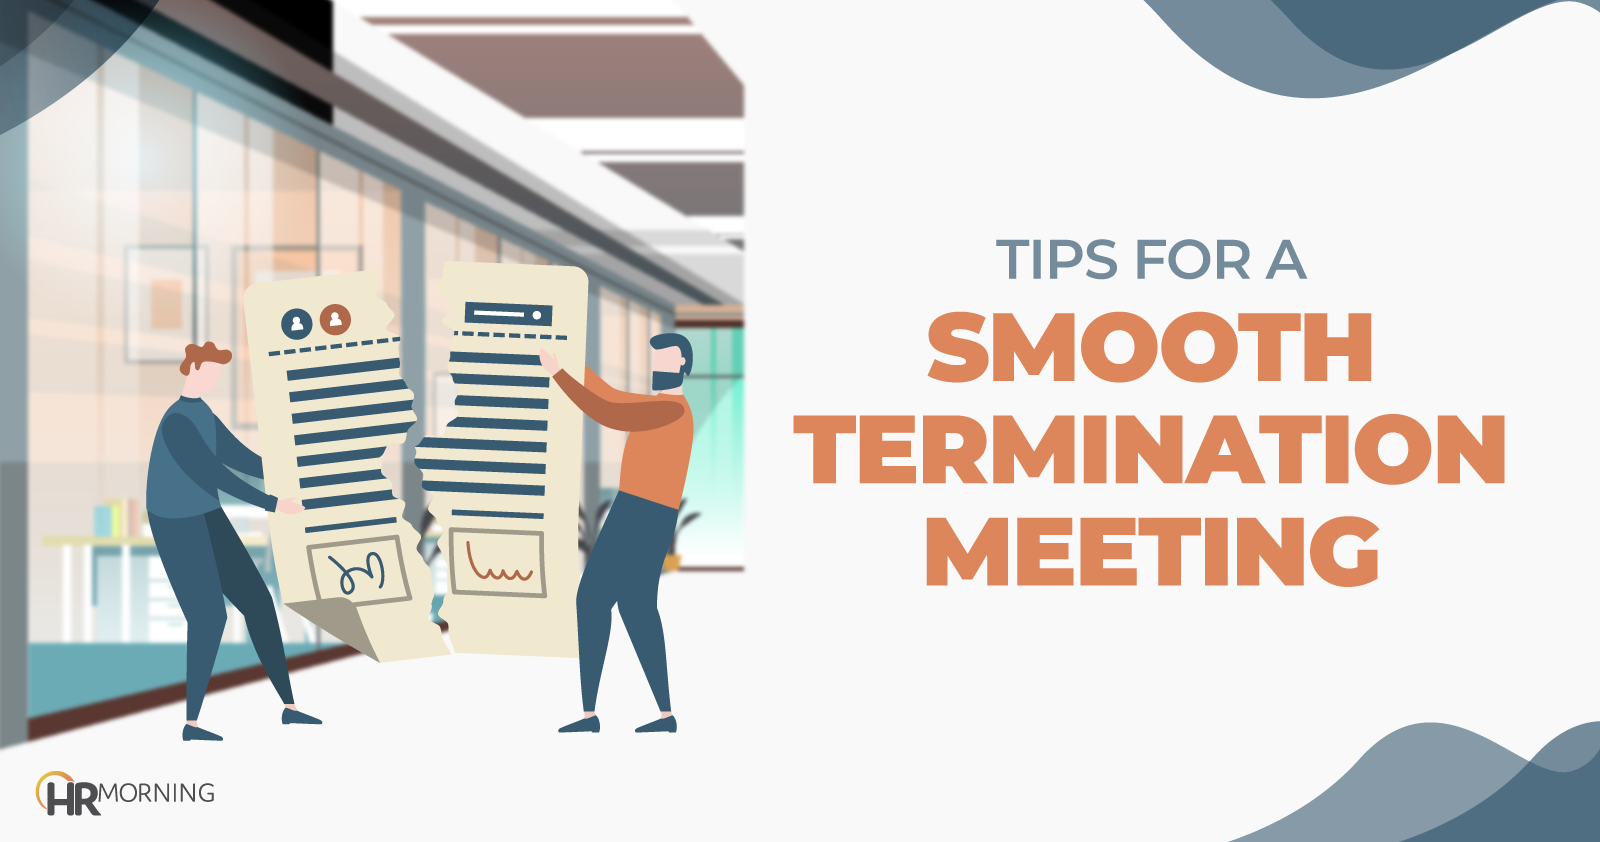 Tips for a smooth termination meeting